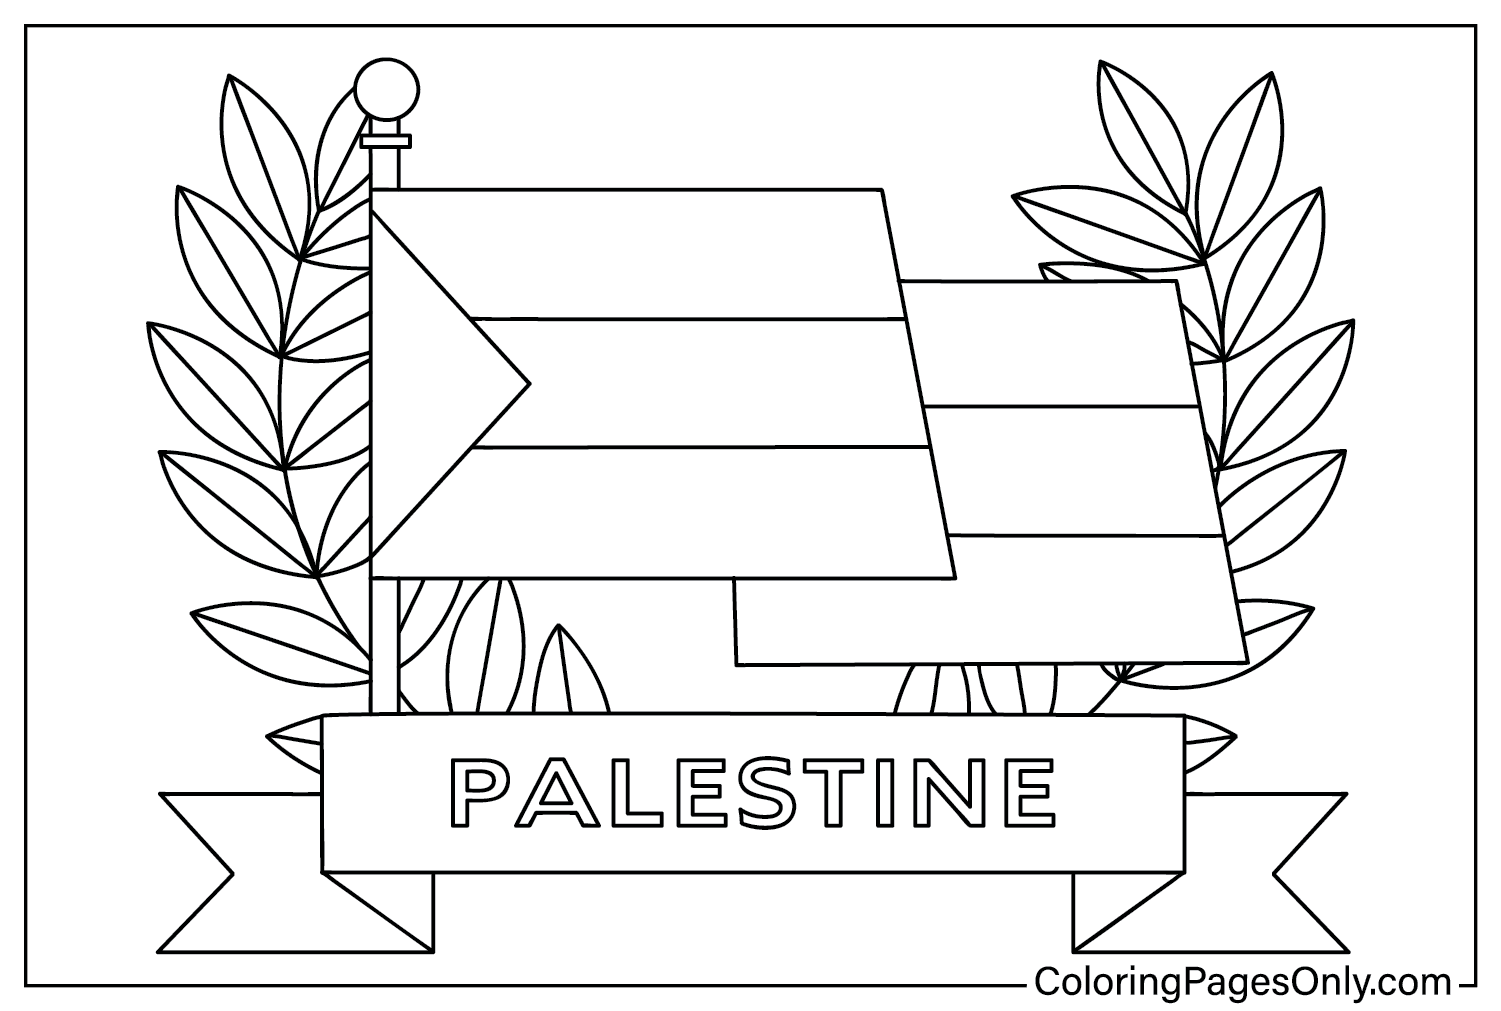 Coloring Page Palestine from Palestine